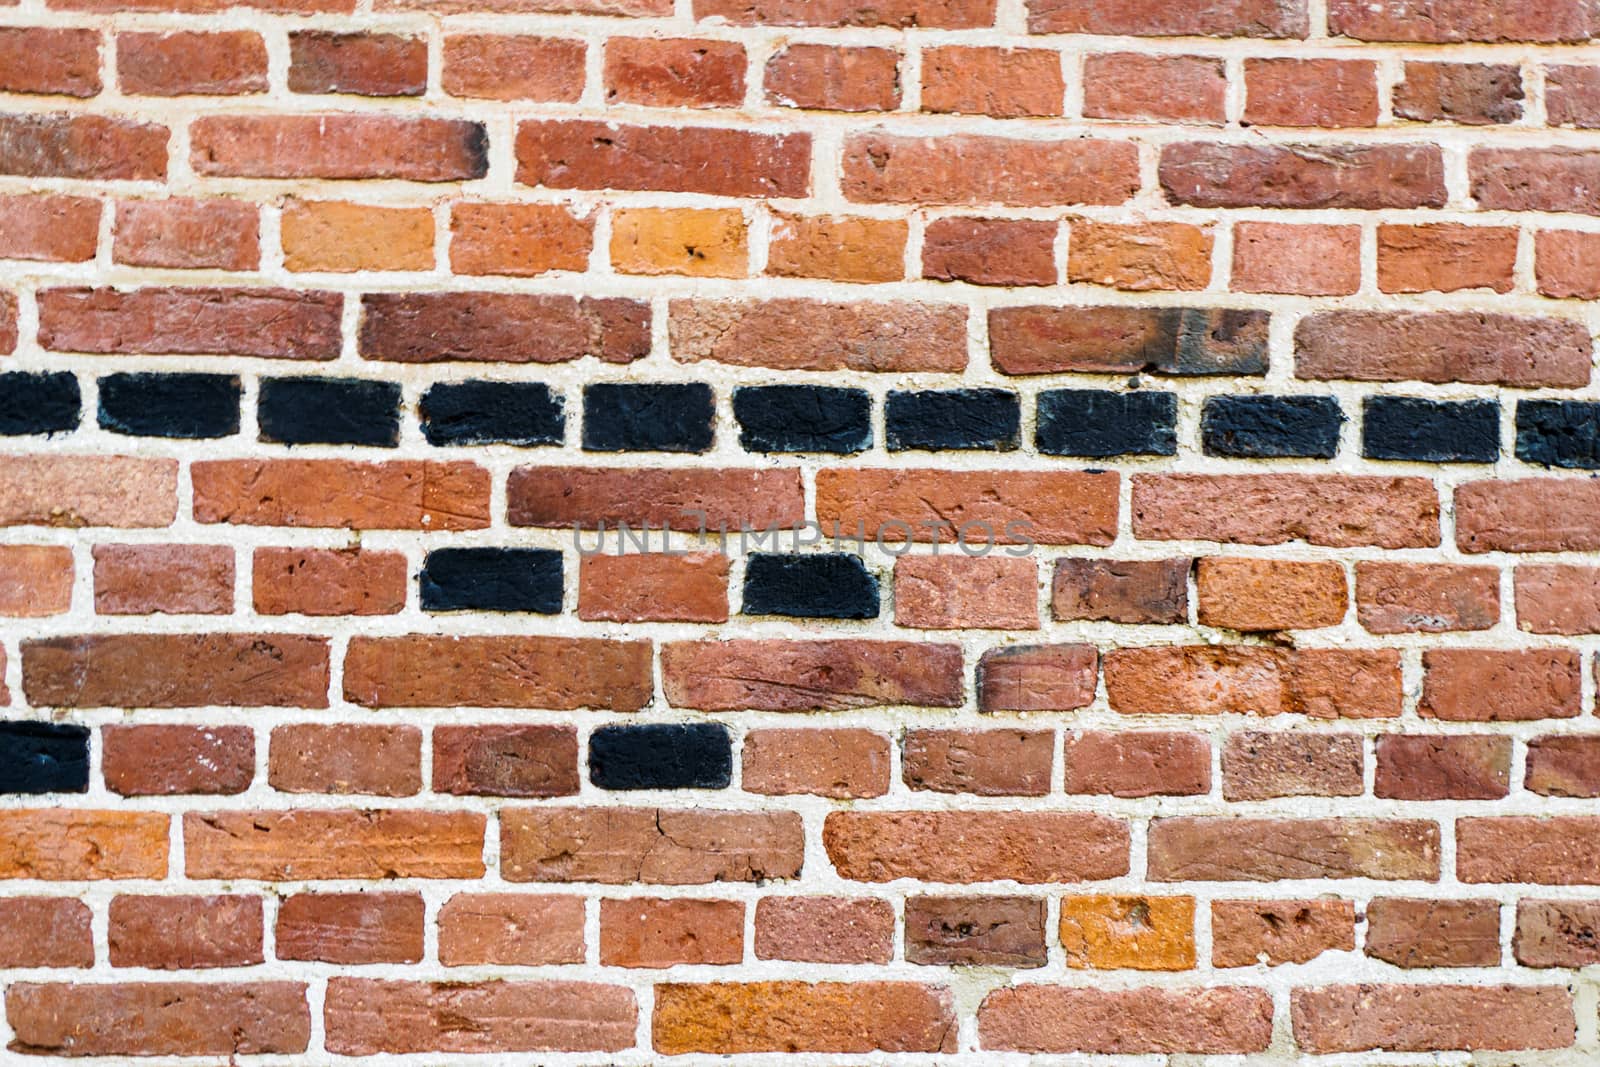 Rough Textured Background of Old Brown Brick Wall. Abstract Aged Brick Wall.